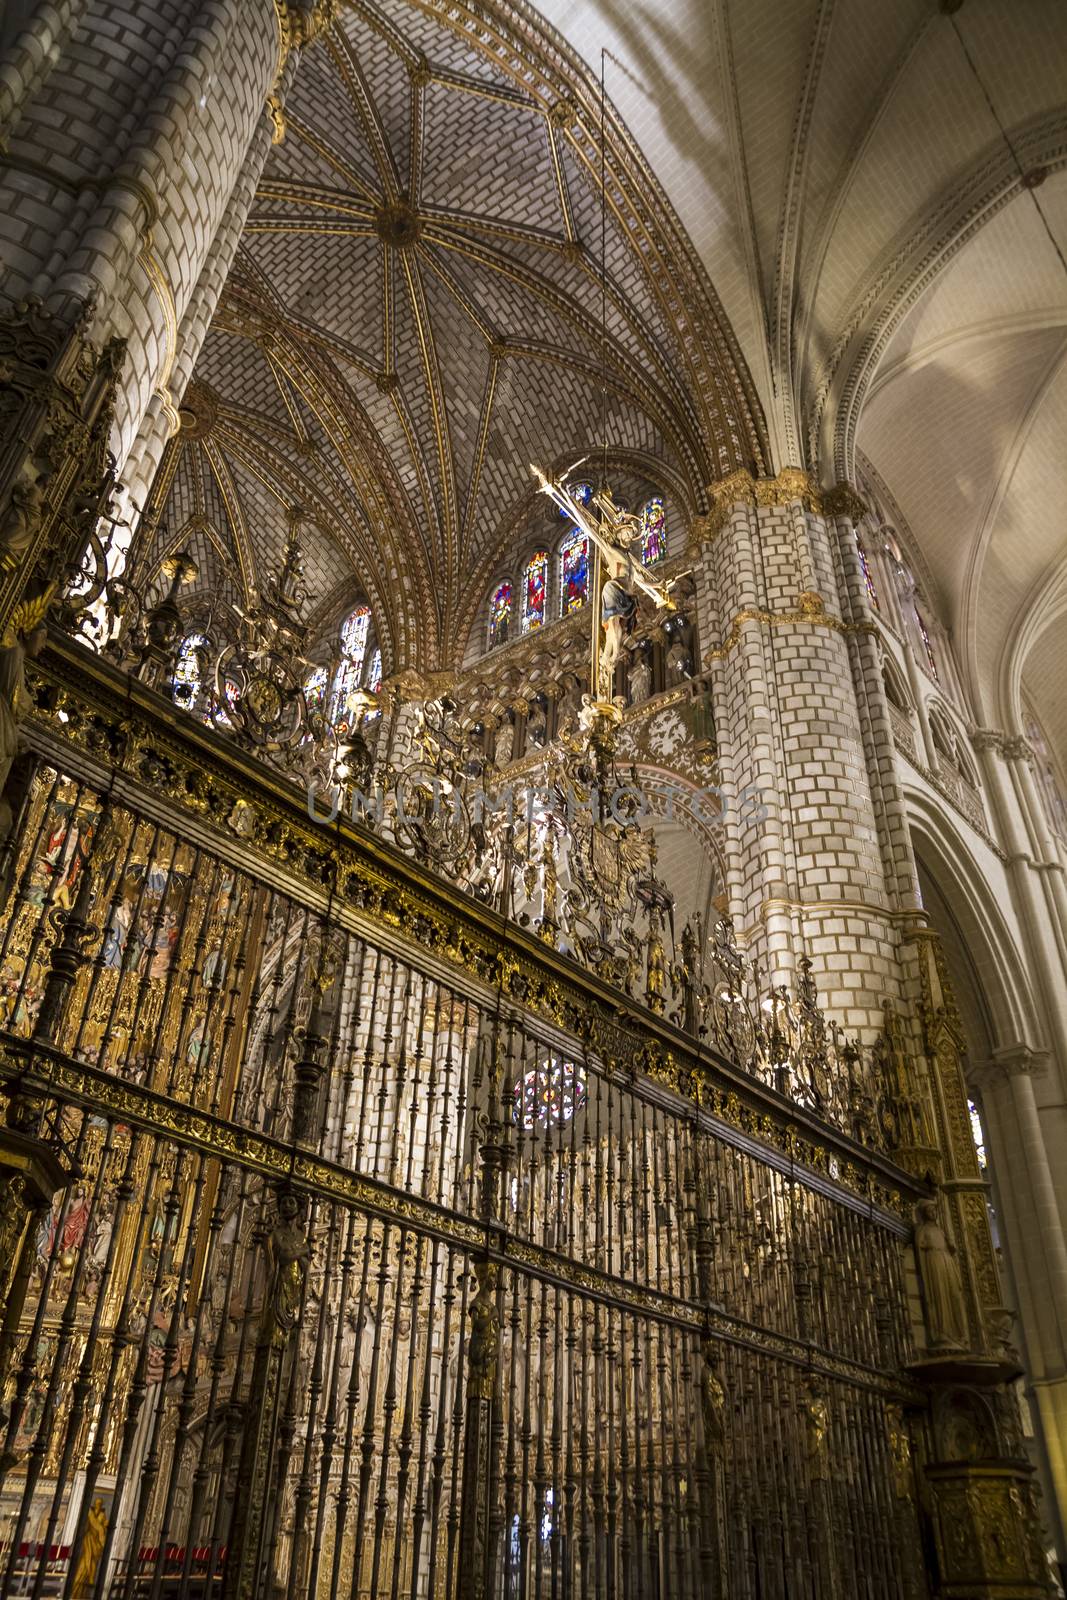 Majestic interior of the Cathedral Toledo, Spain. Declared World by FernandoCortes